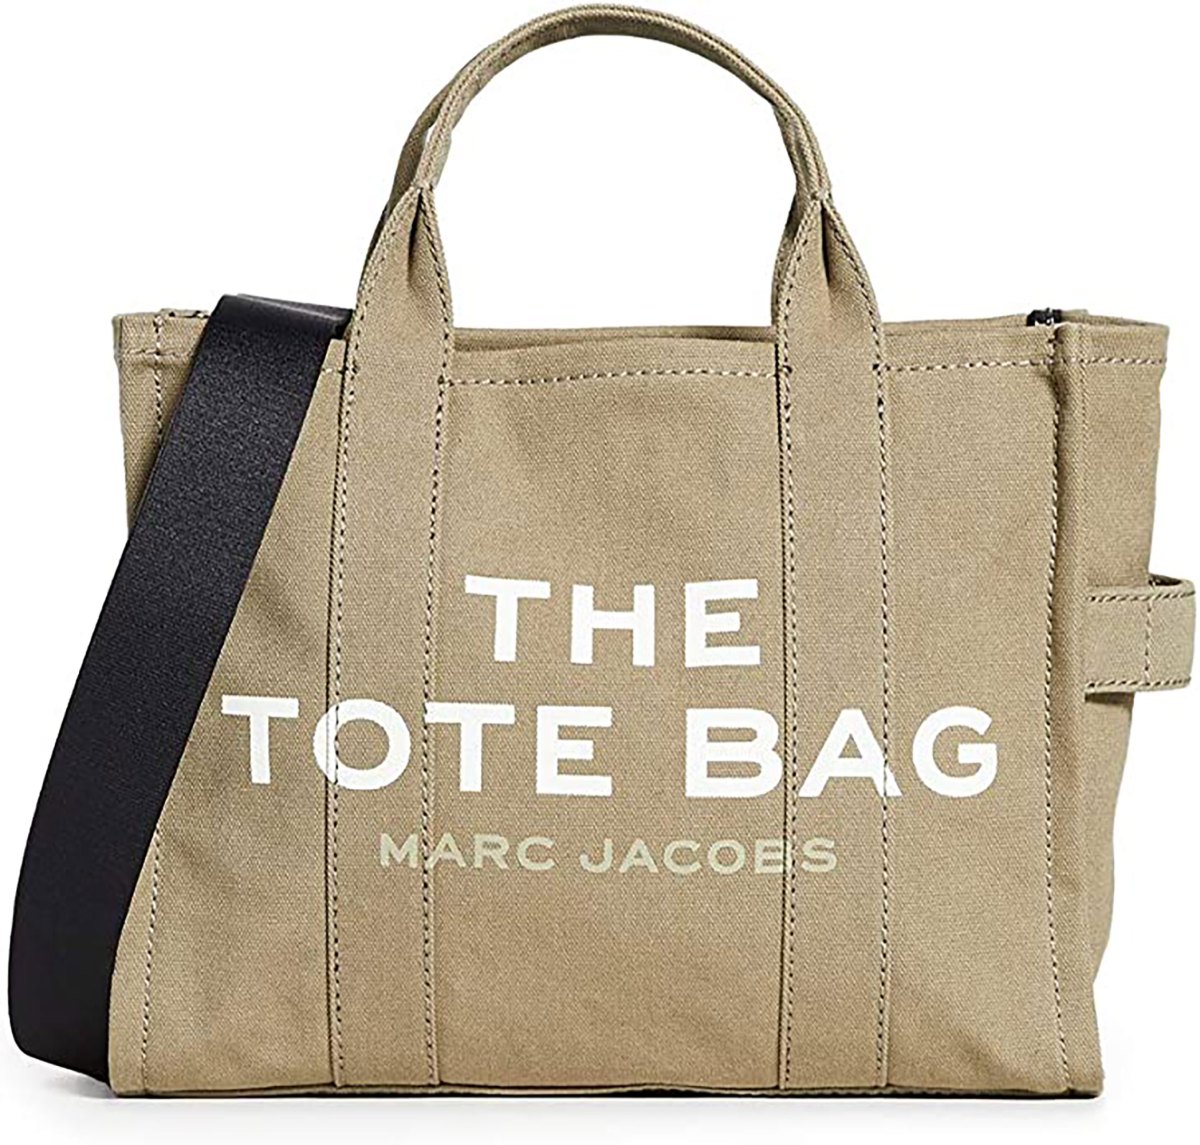 Is The Marc Jacobs The Tote Bag a Modern Classic? - PurseBlog